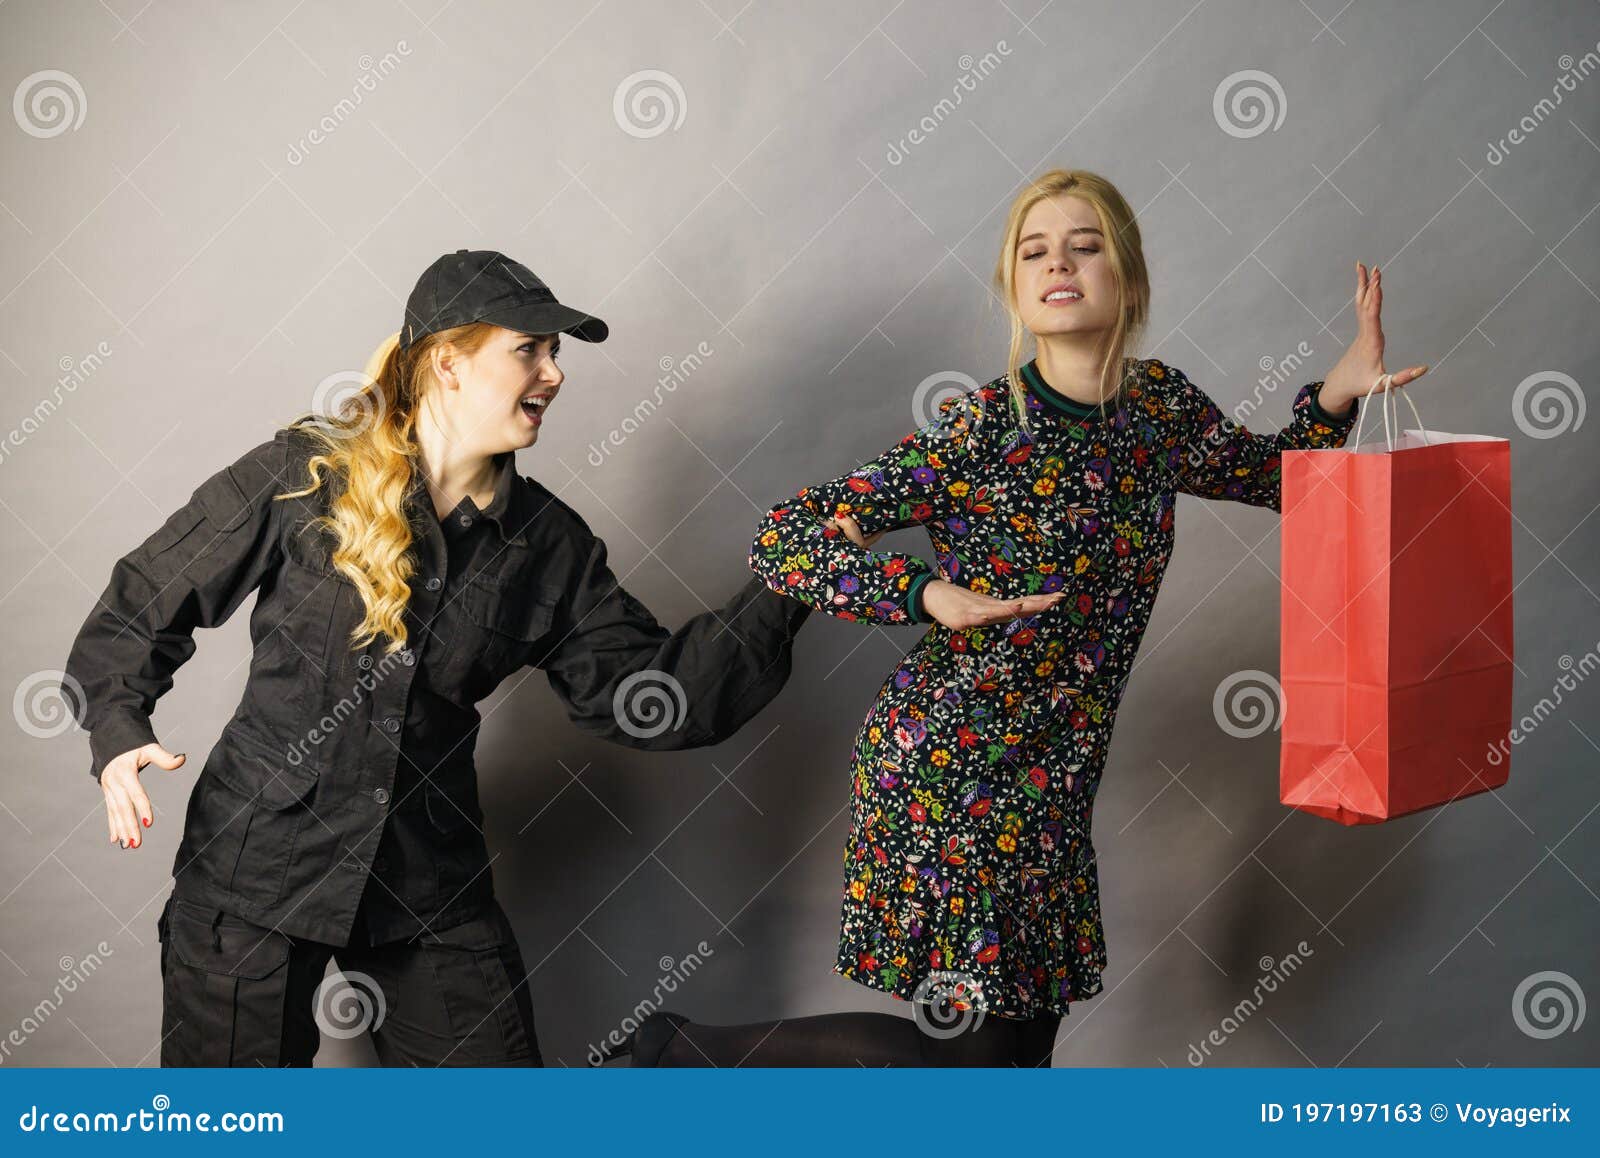 Security Guard And Shoplifter Stock Image Image Of Woman Guard 197197163 